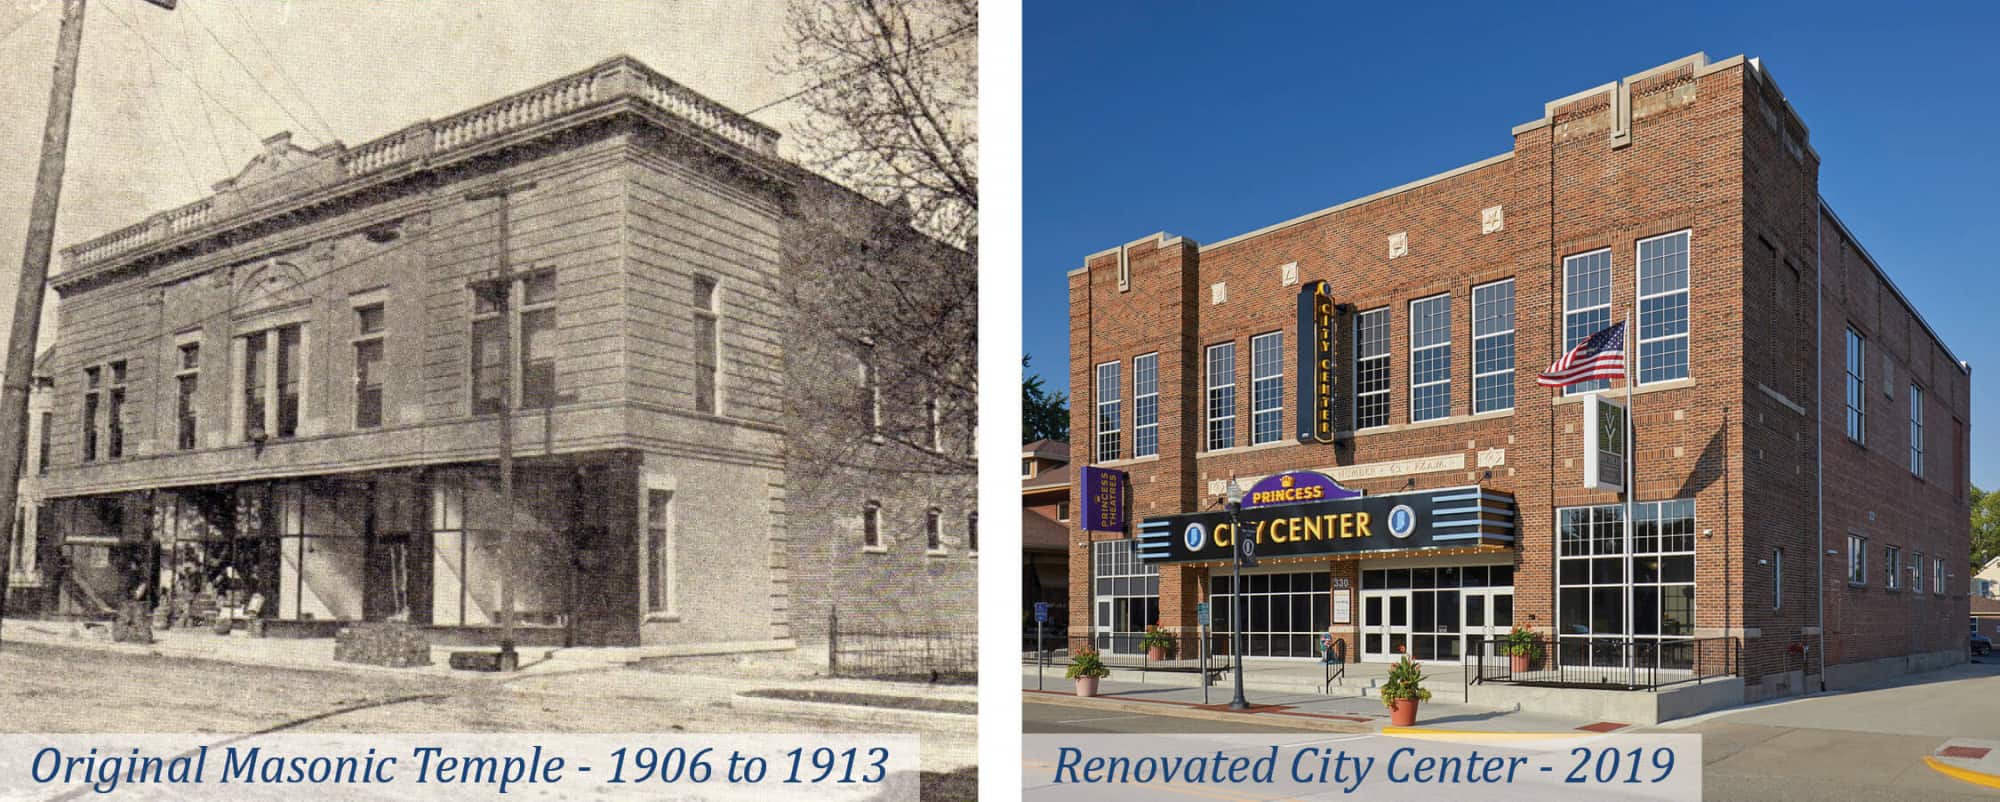 Historic Masonic Temple in Rushville Comparison to Remodeled Building in 2019